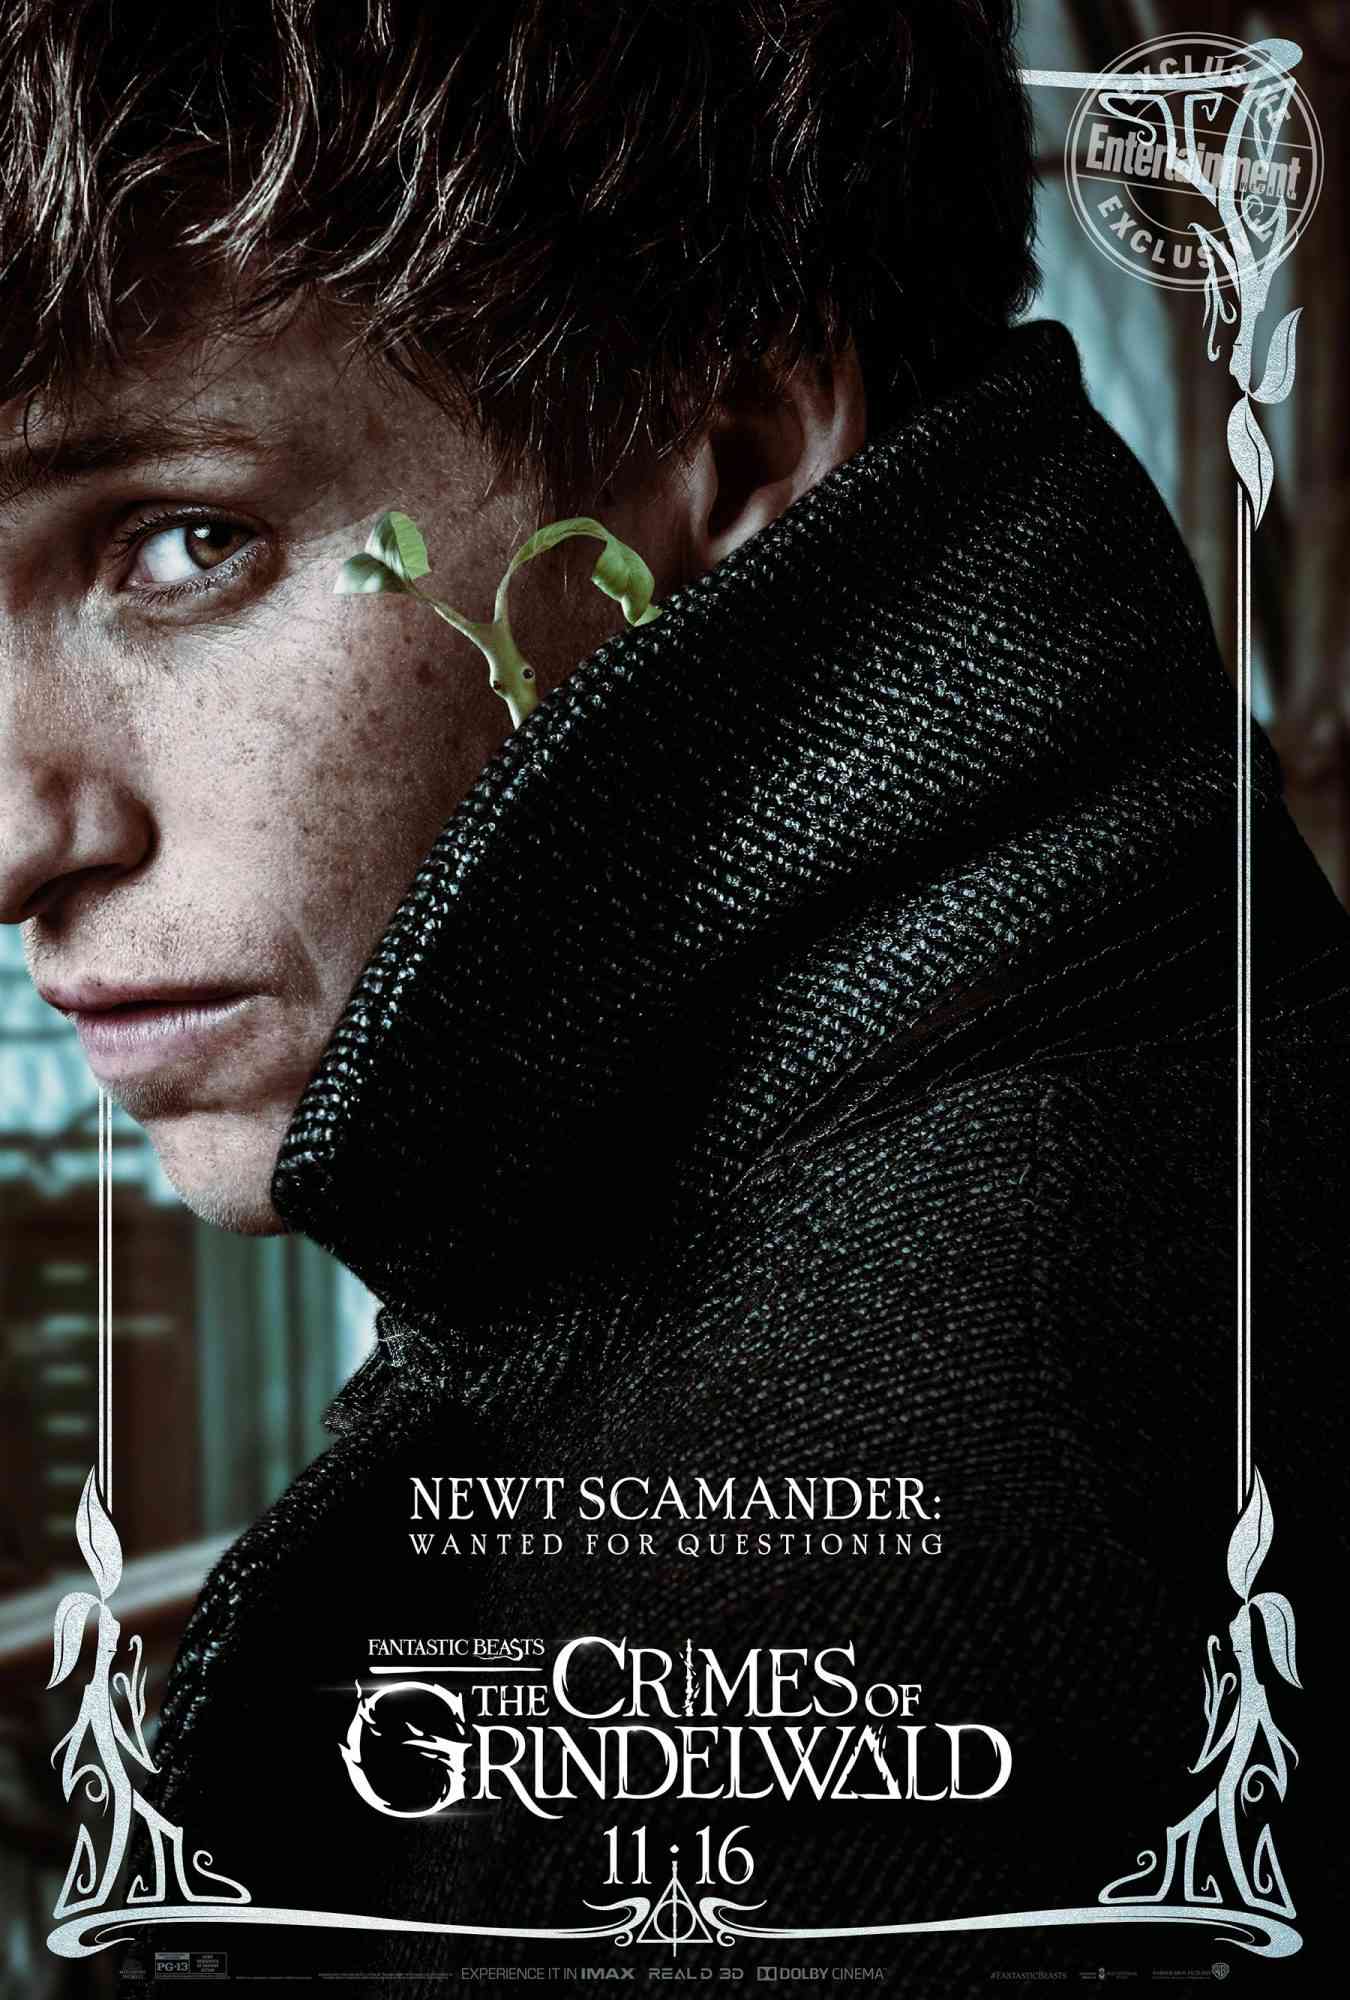 Newt Scamander: Wanted for Questioning